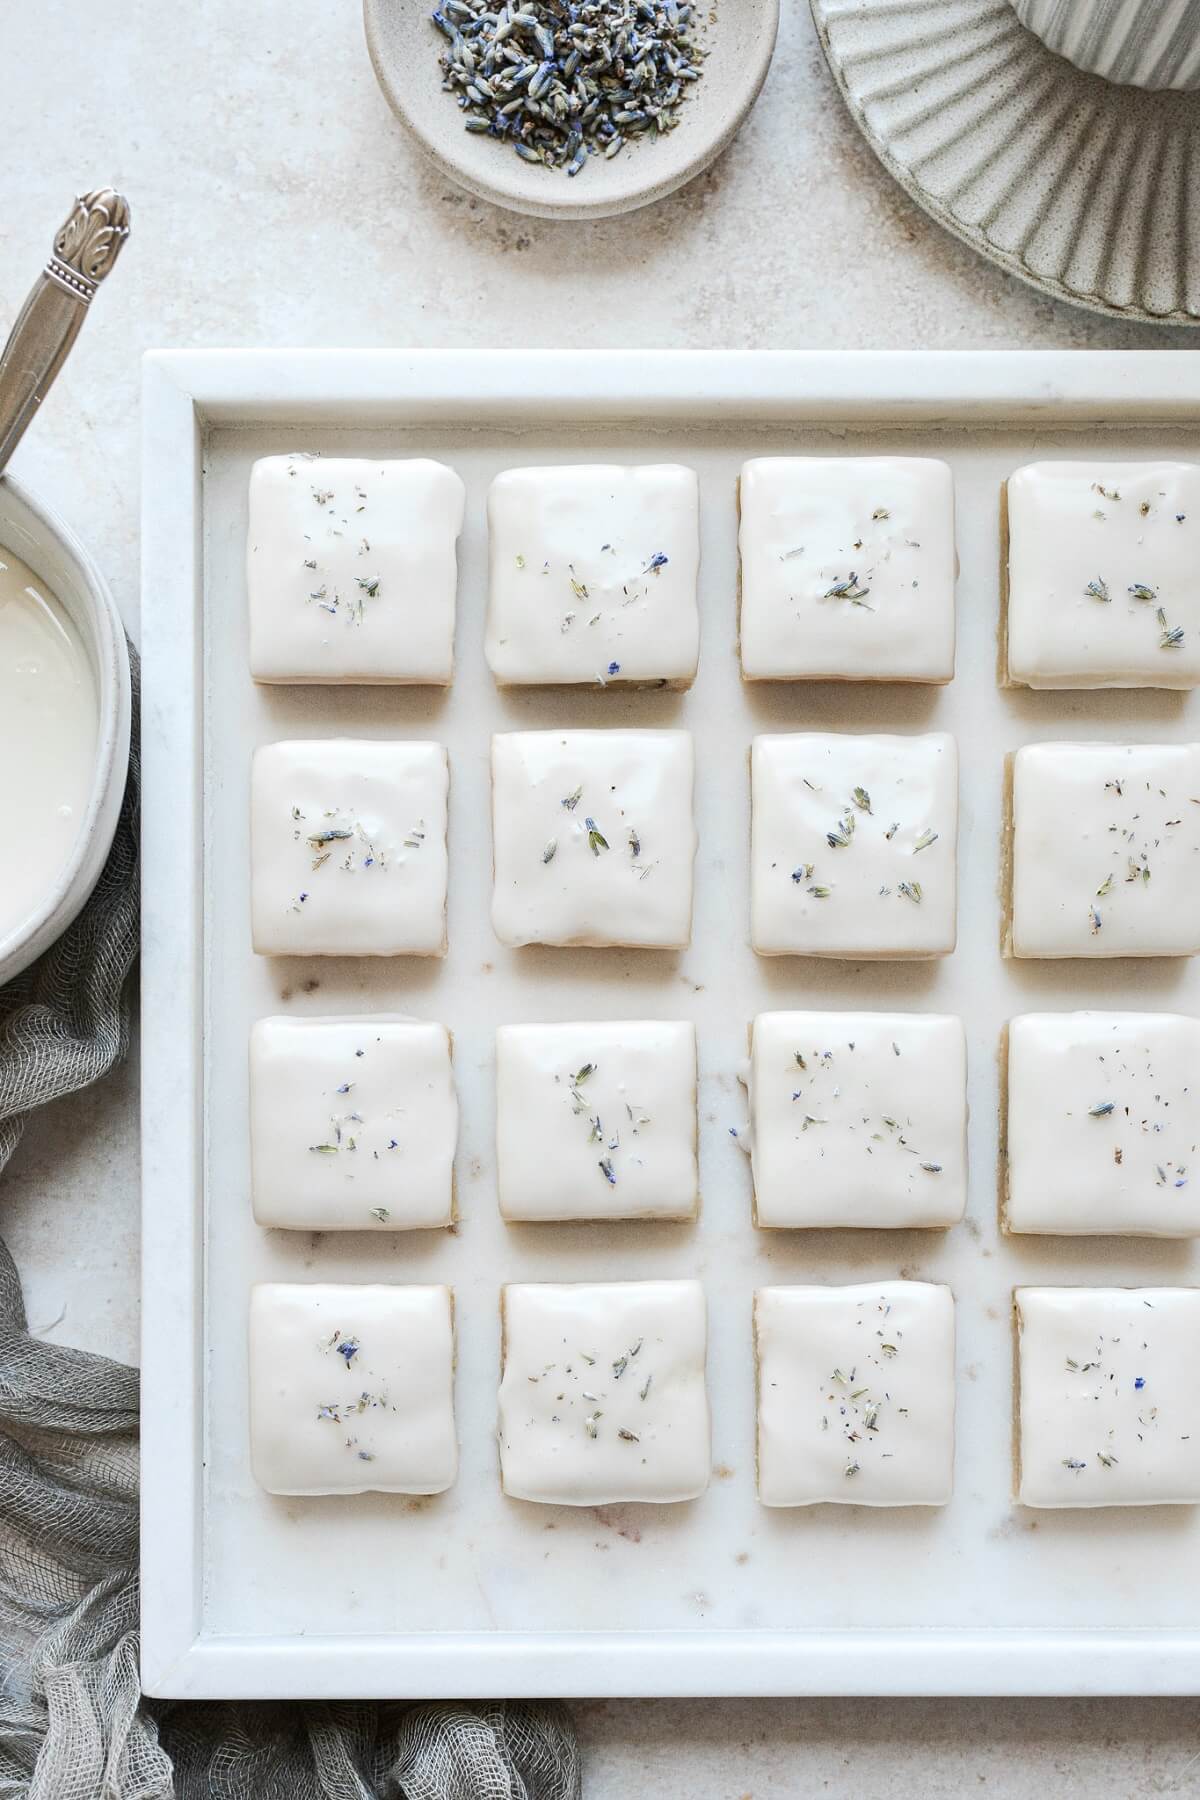 Iced lavender lemon shortbread cookies on a marble tray.